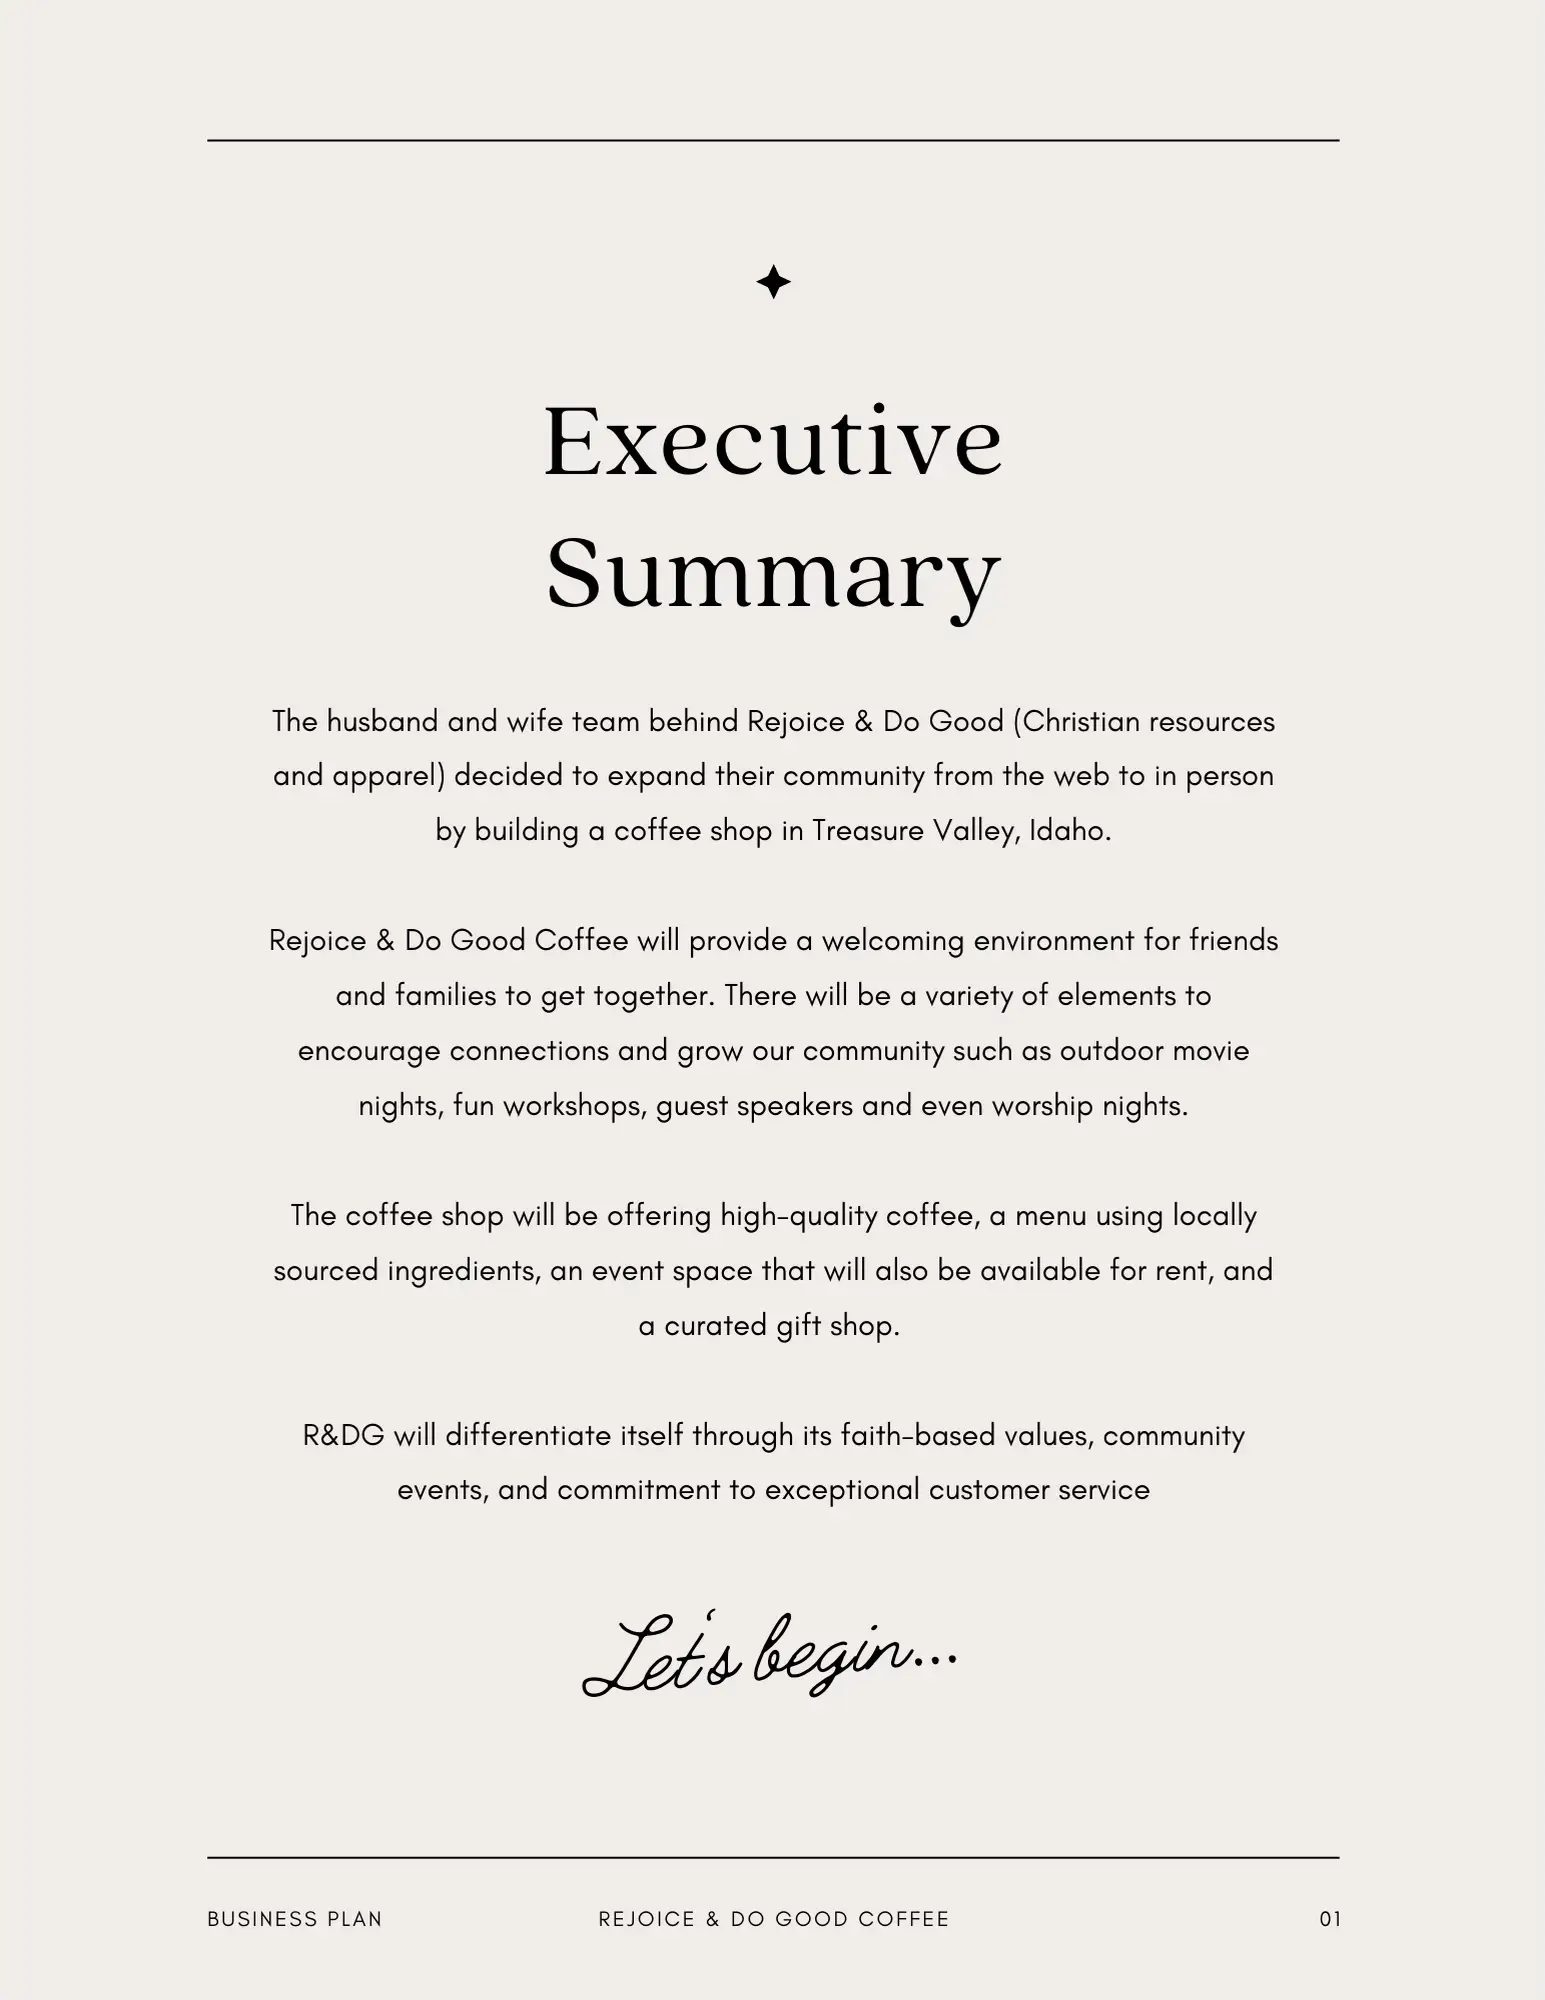  A business plan for a coffee shop called Rejoice & Do Good.